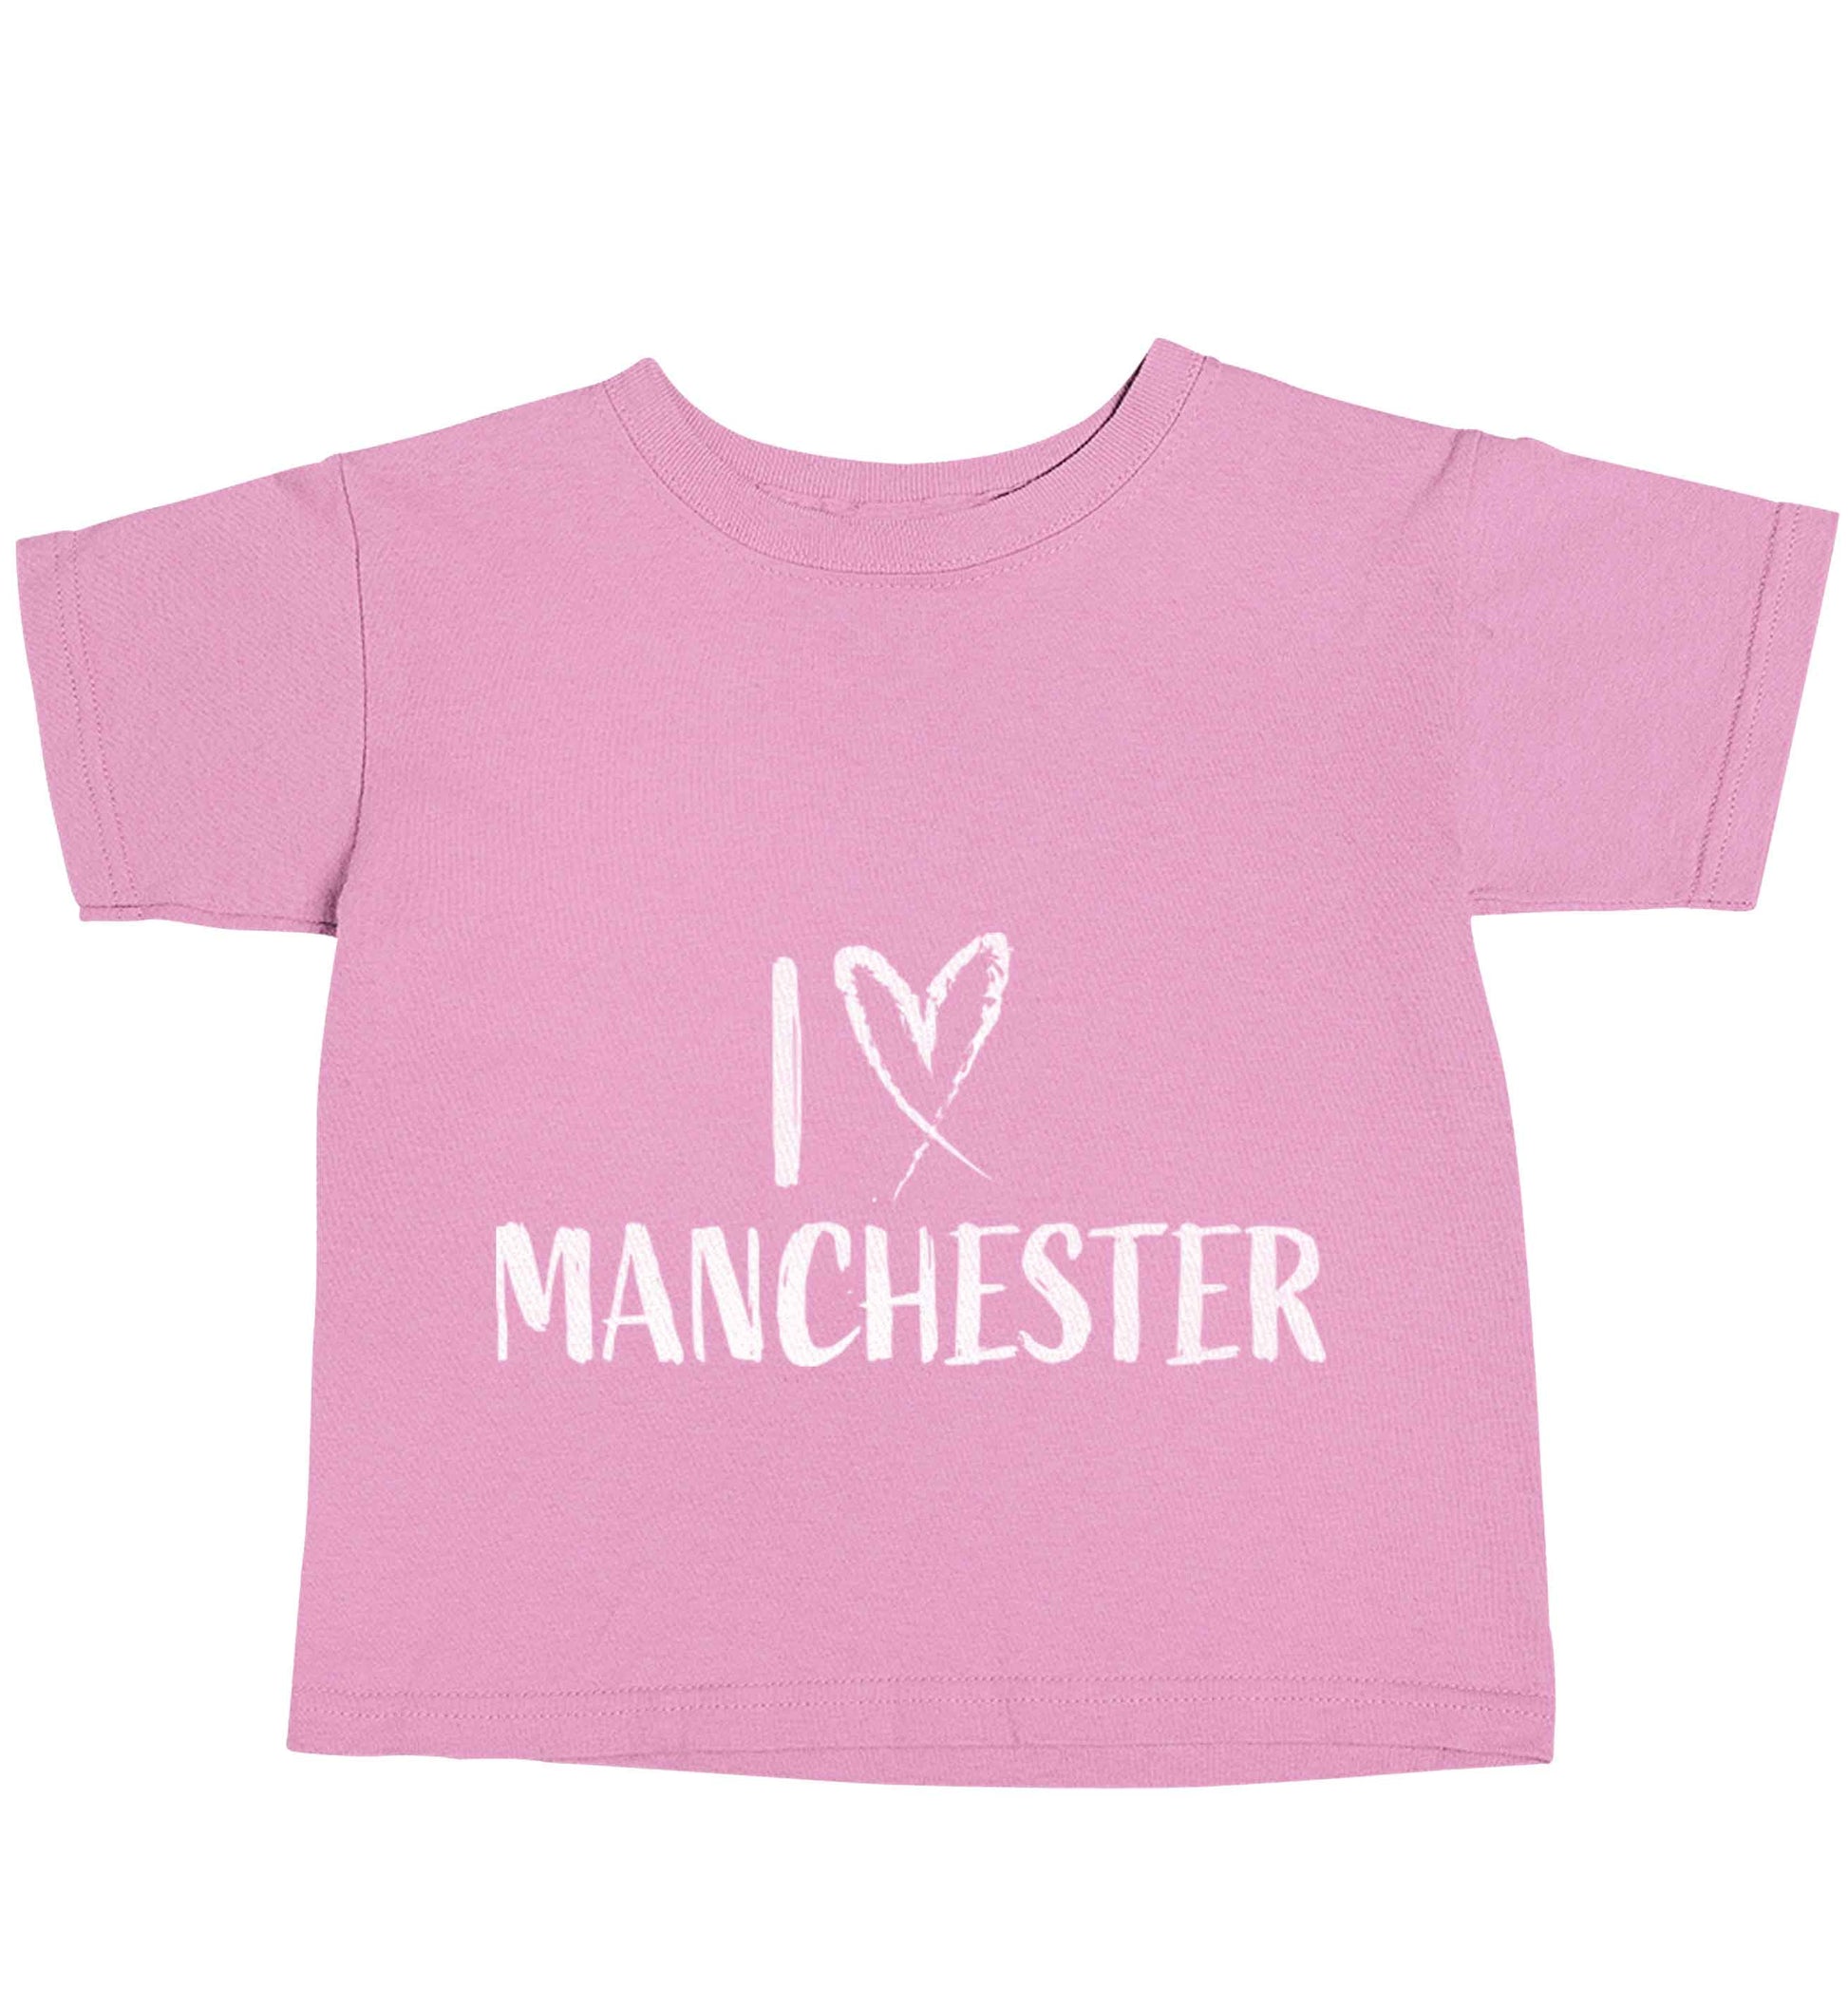 I love Manchester light pink baby toddler Tshirt 2 Years